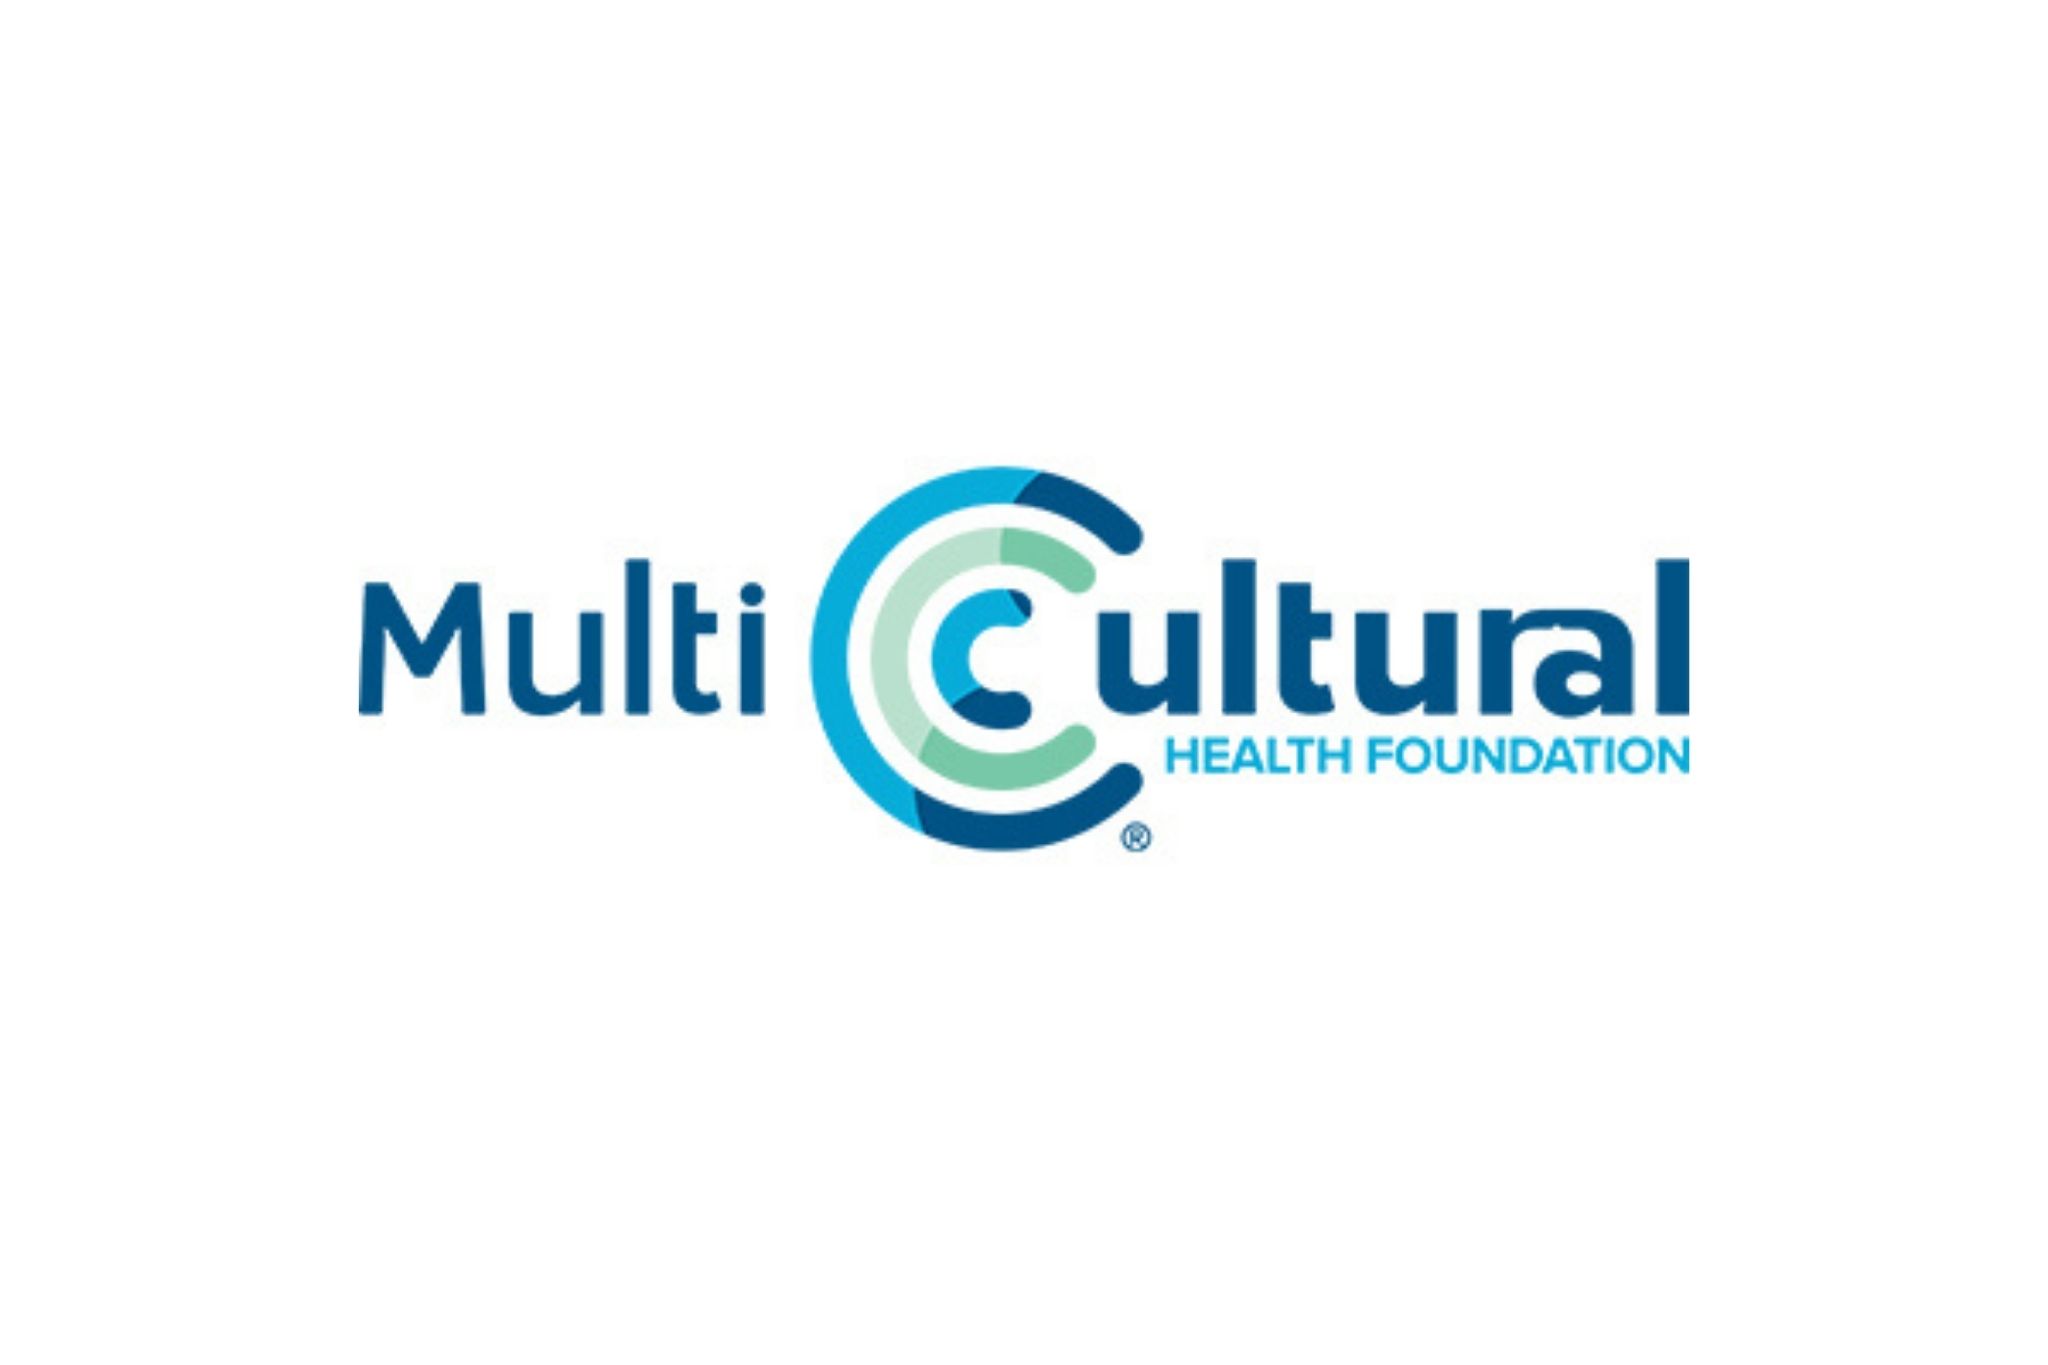 The Multicultural Health Foundation